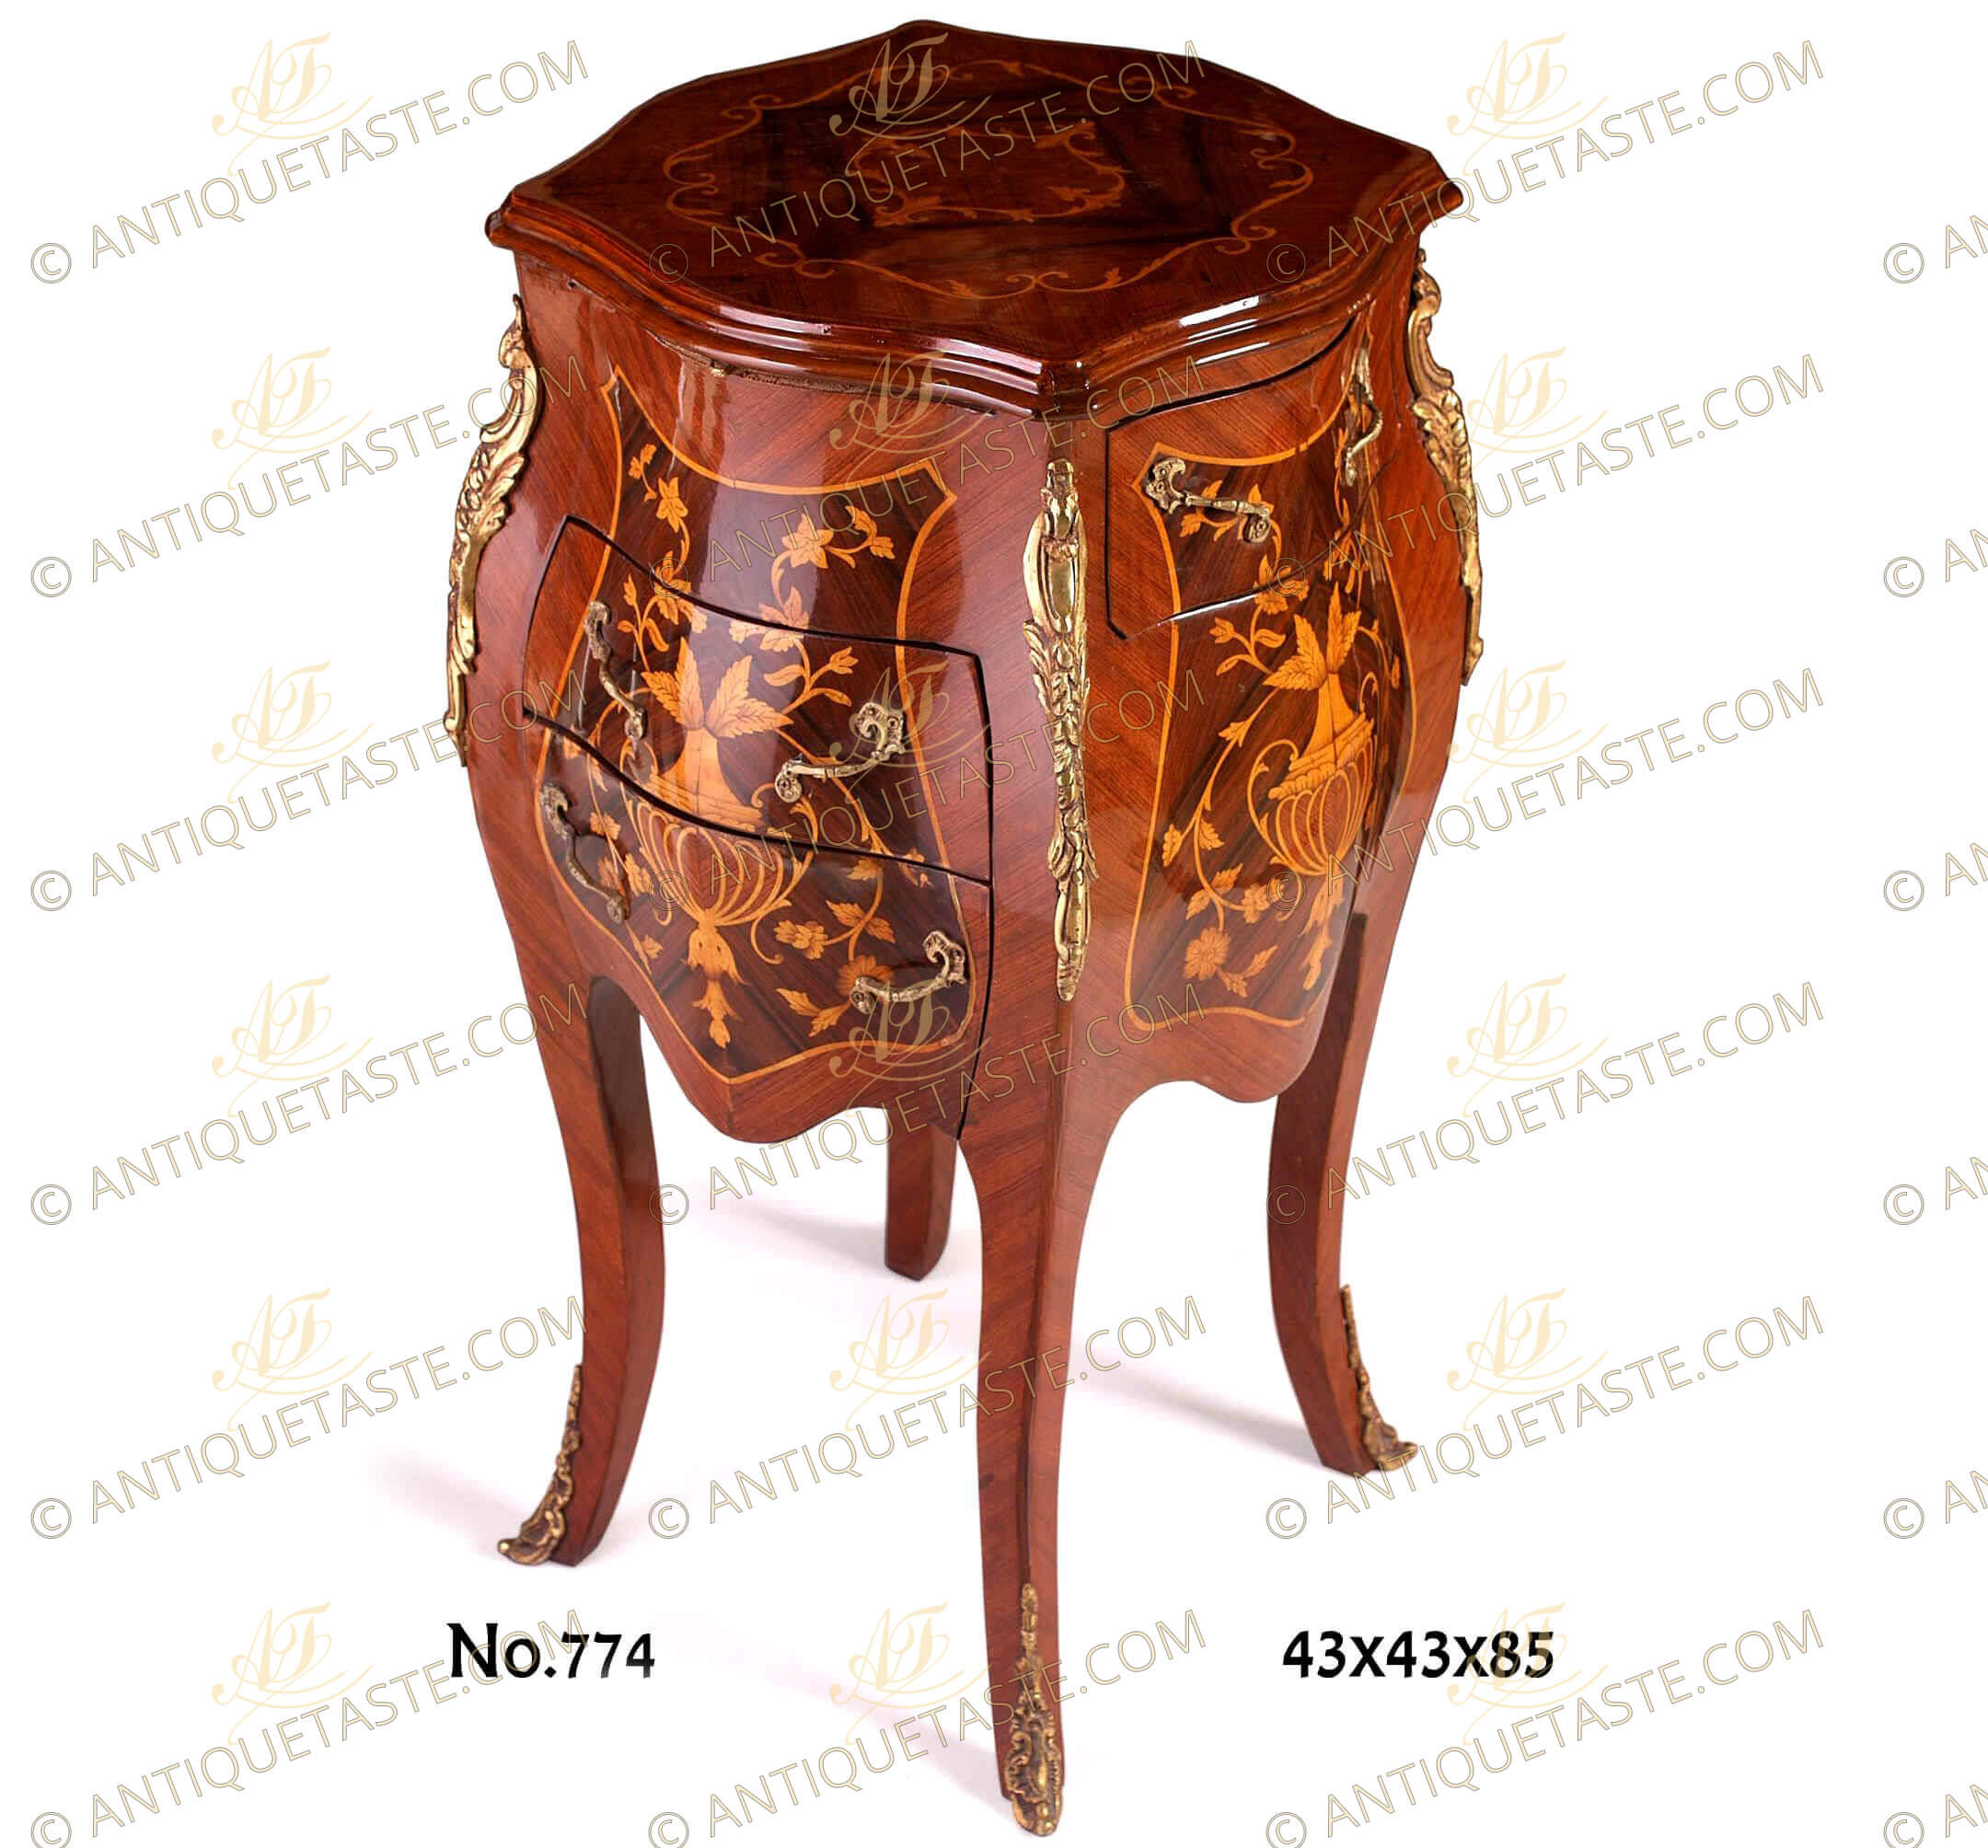 An artistic exotic marquetry and veneer inlaid French Louis XV style Bombé Ewer shaped three Drawers side Commode